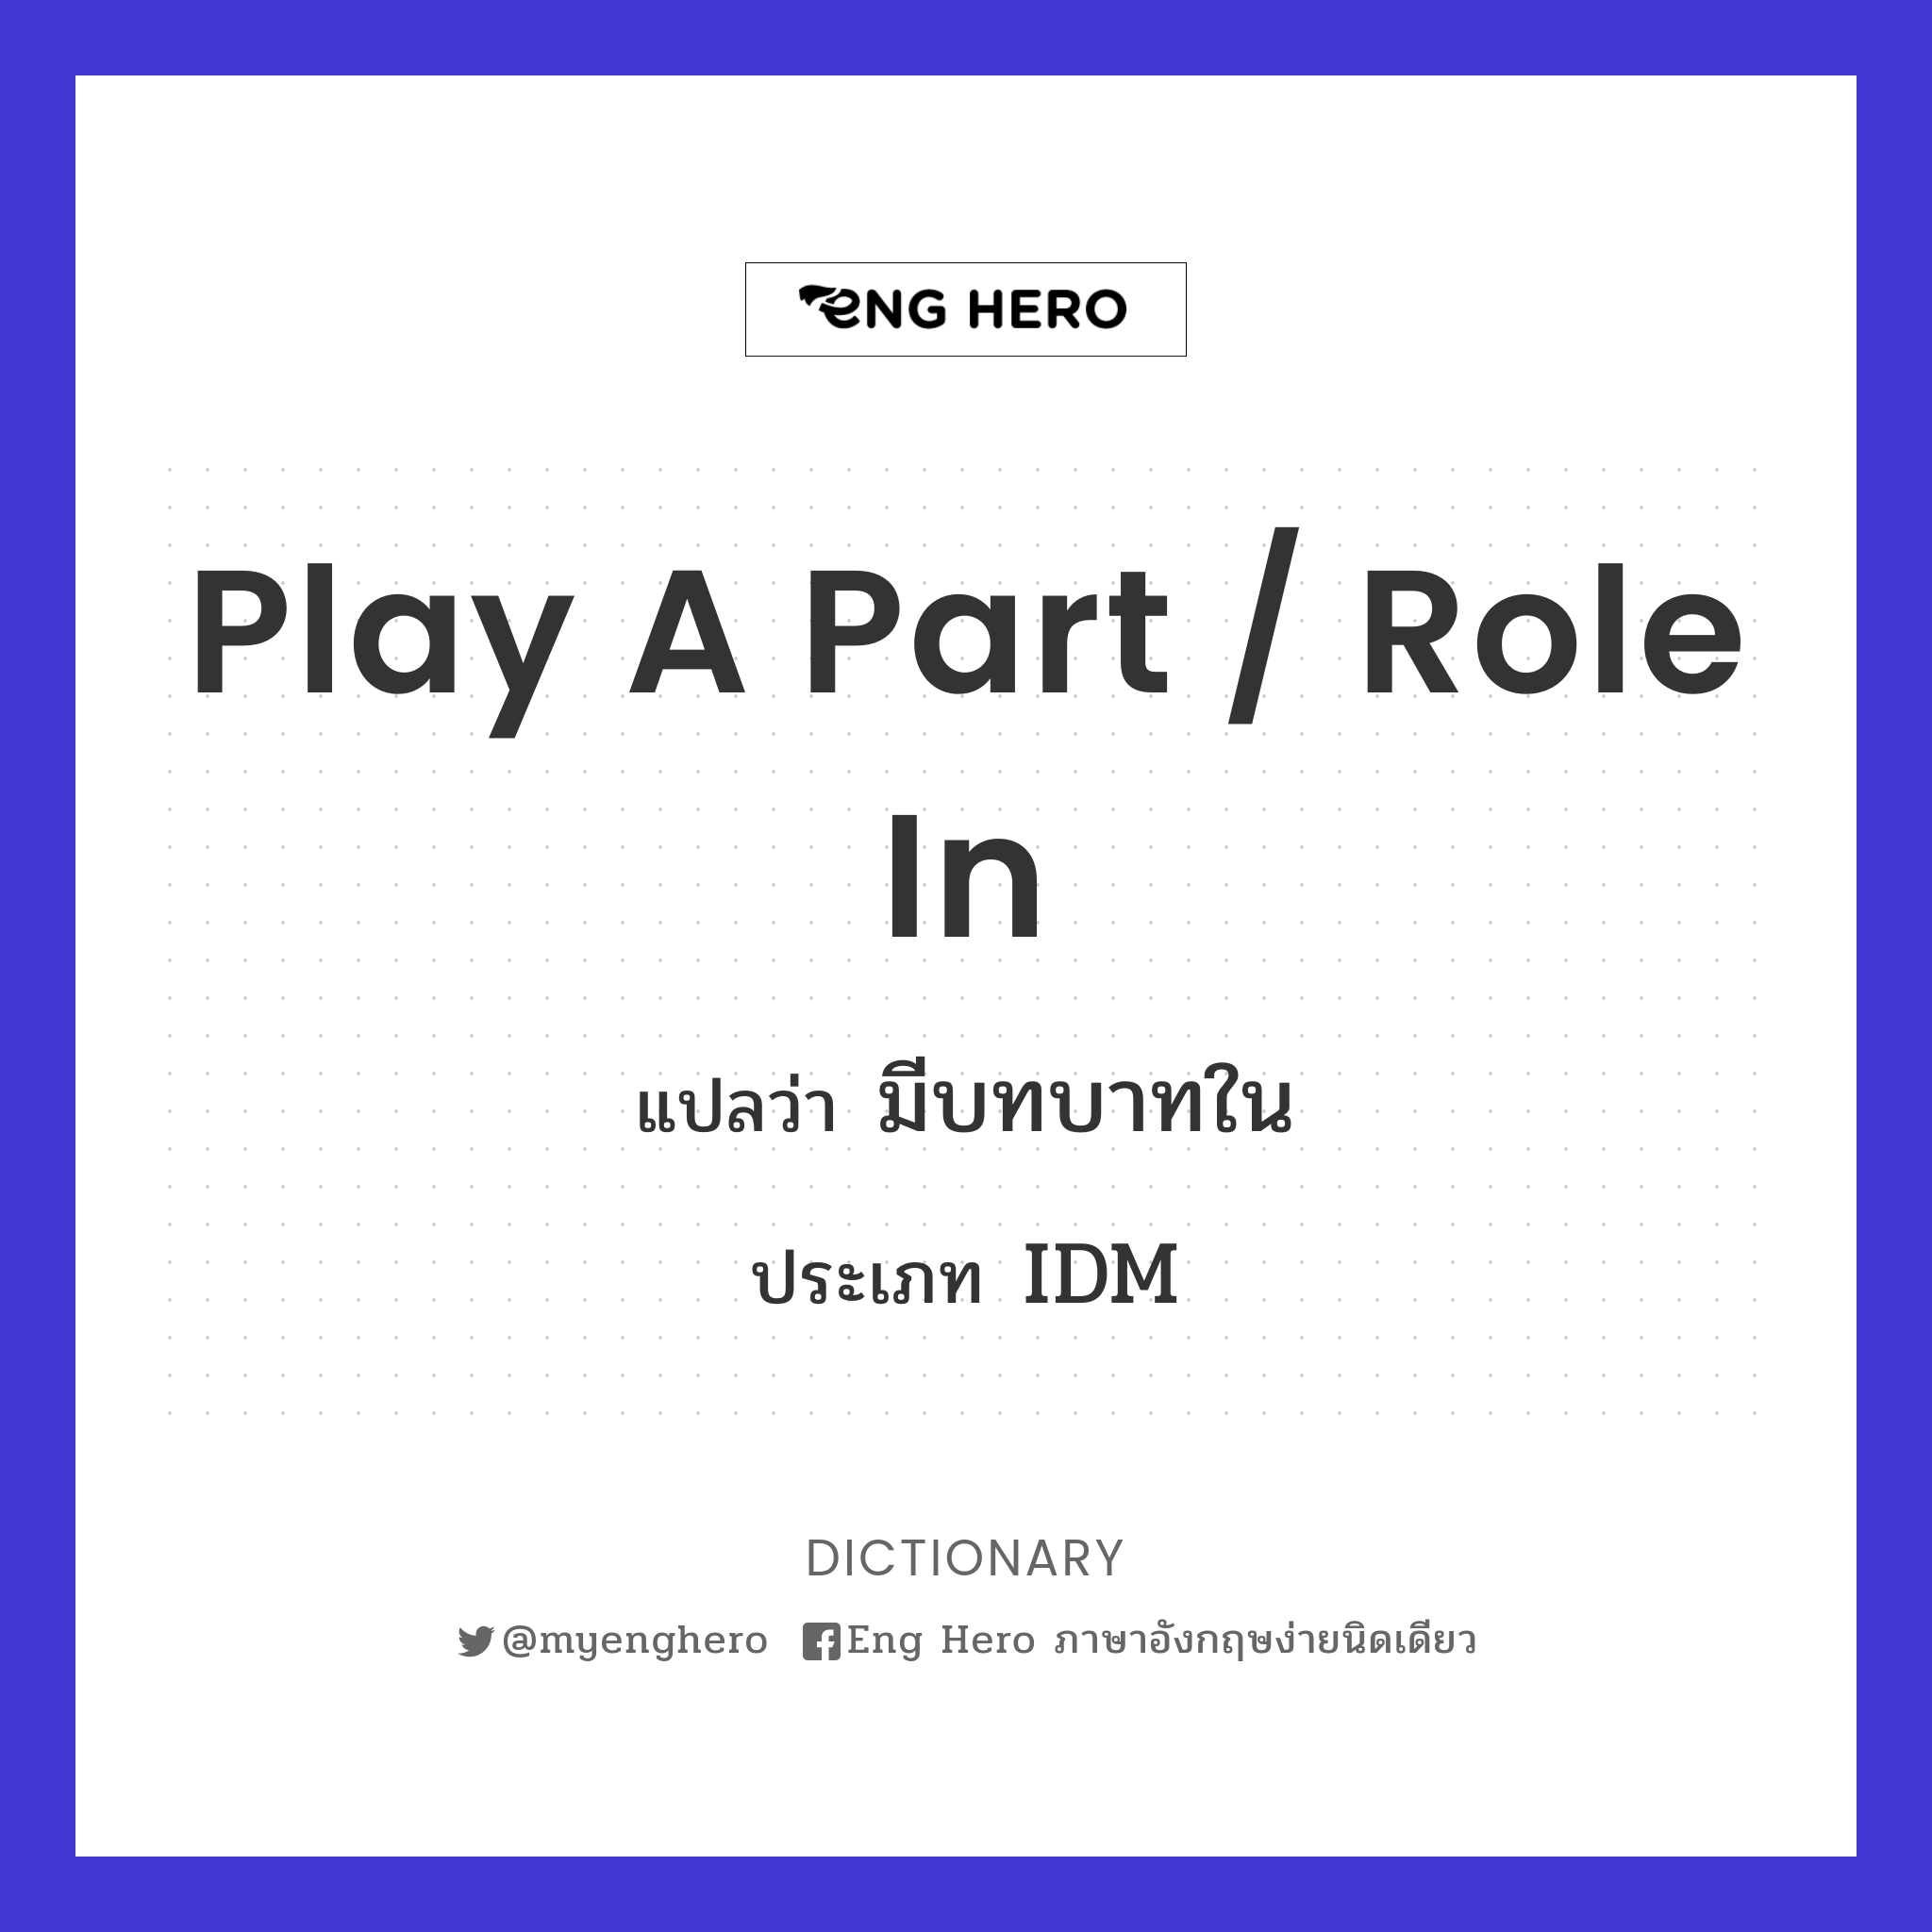 play a part / role in